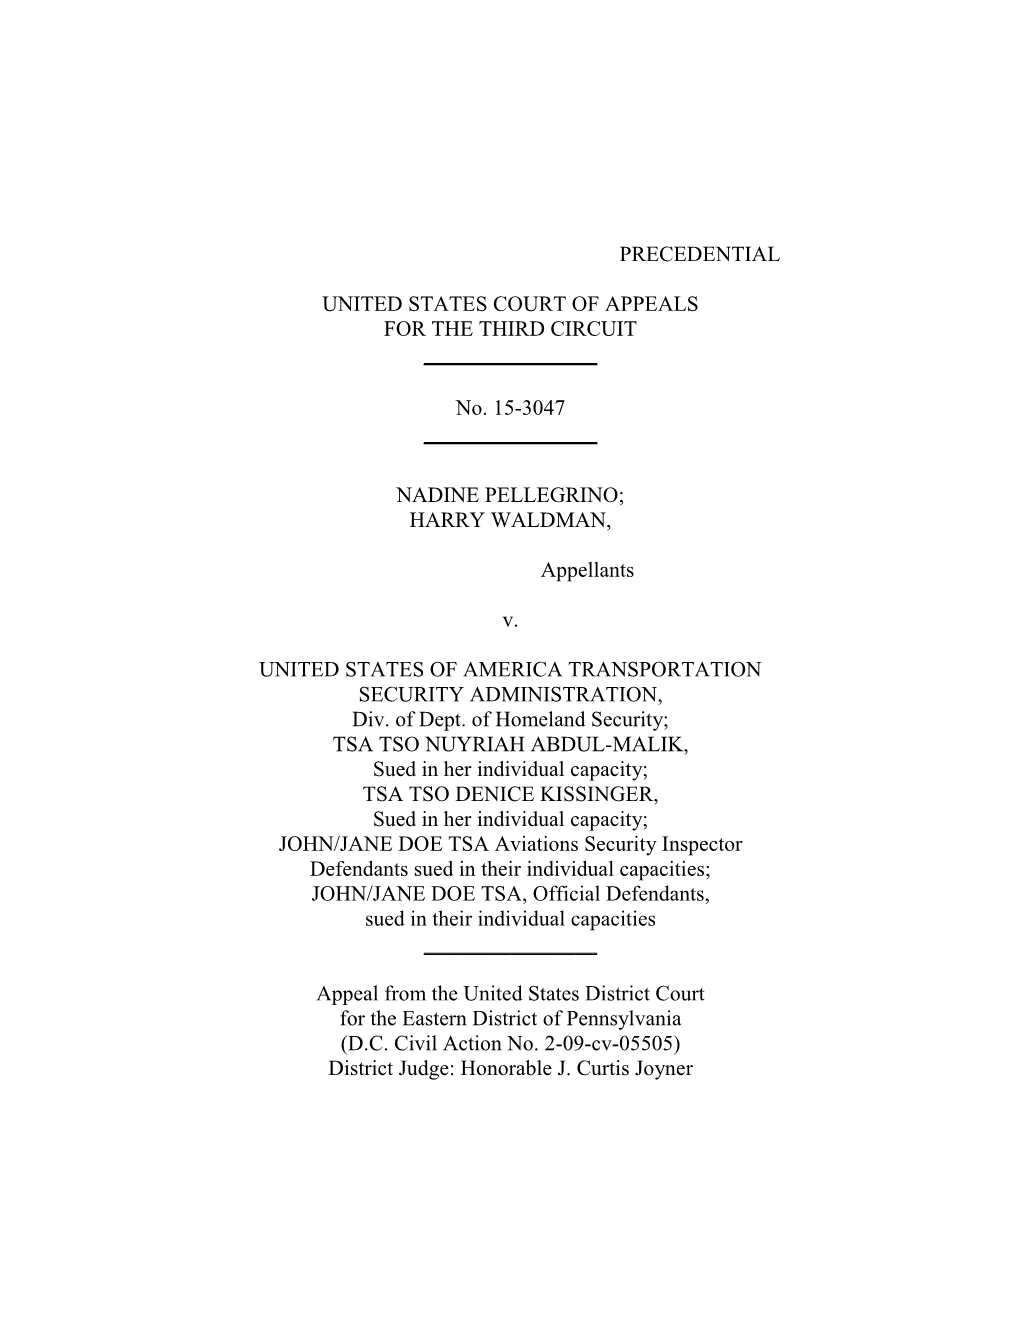 PRECEDENTIAL UNITED STATES COURT of APPEALS for the THIRD CIRCUIT No. 15-3047 NADINE PELLEGRIN